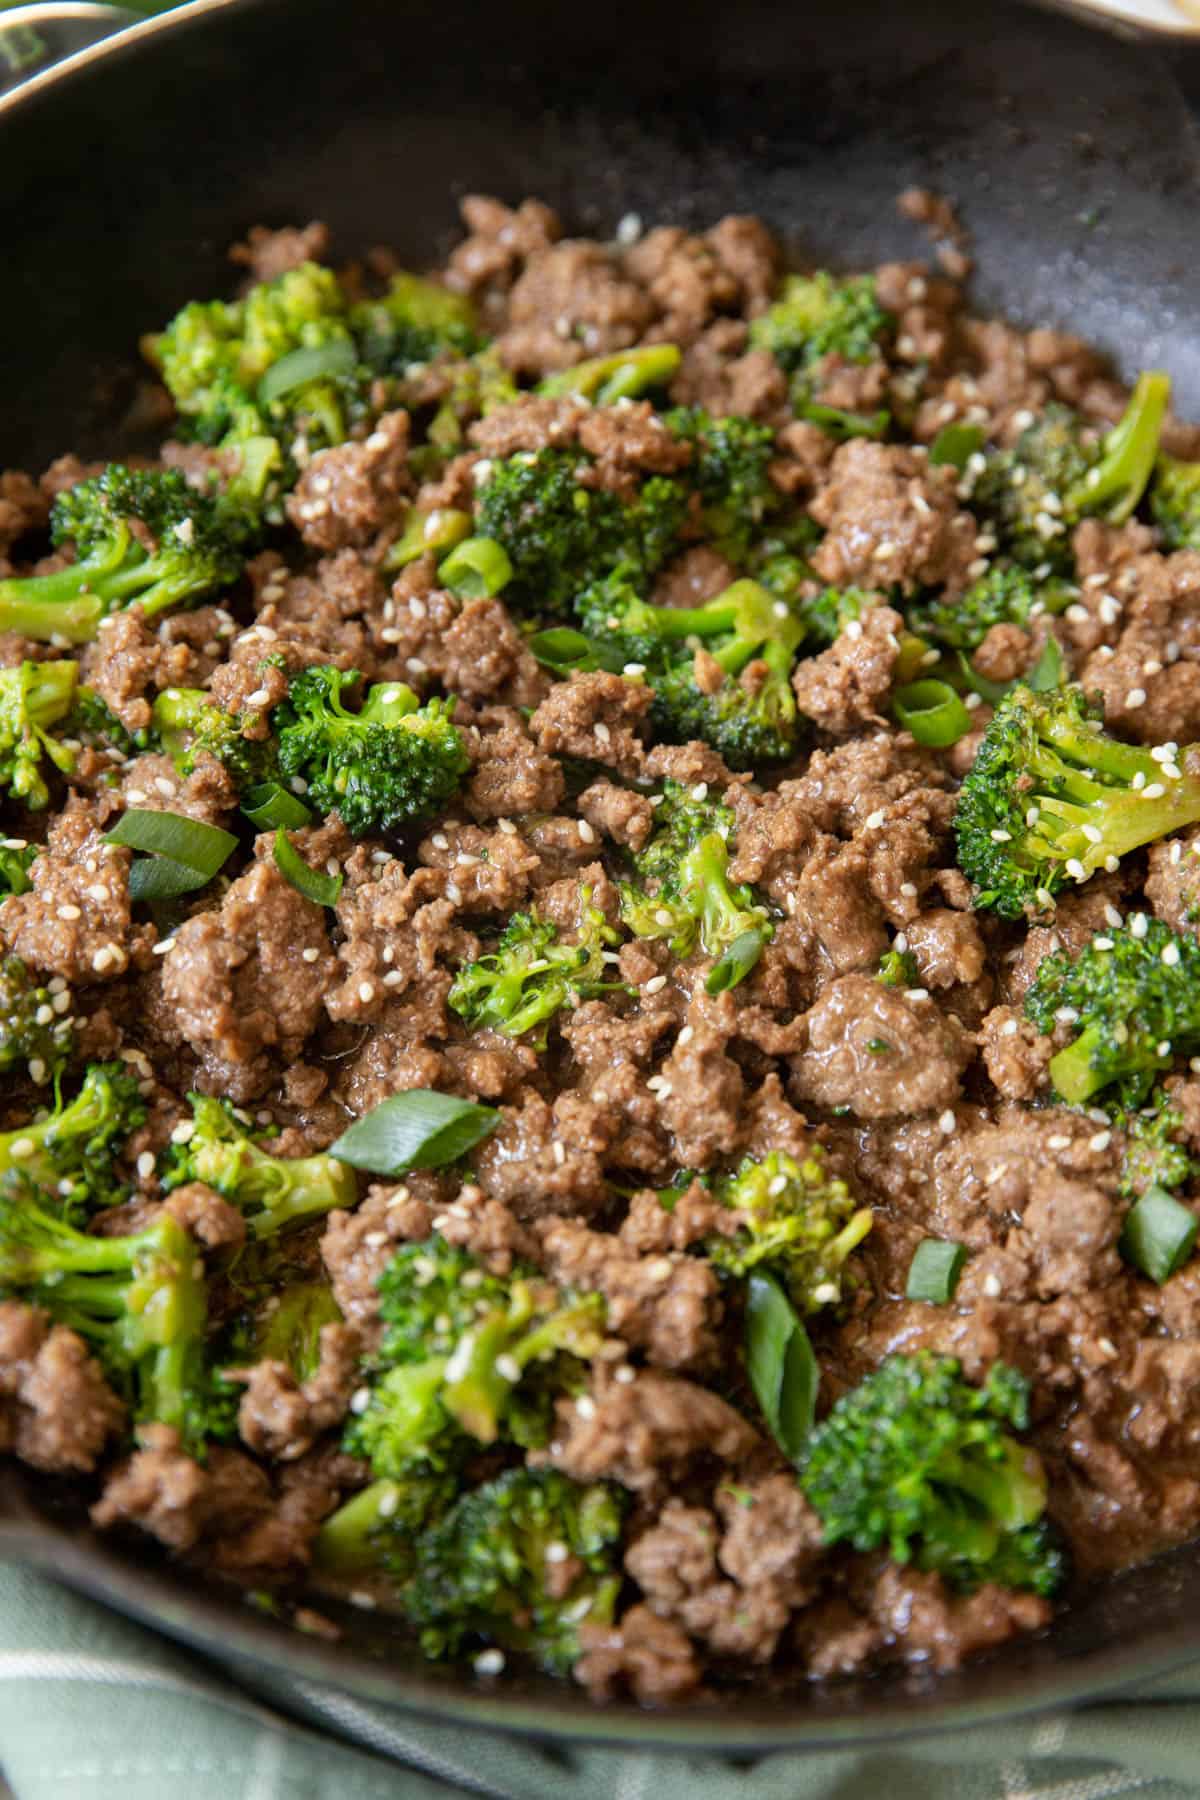 Cooked ground beef and broccoli in a skillet ready for serving.